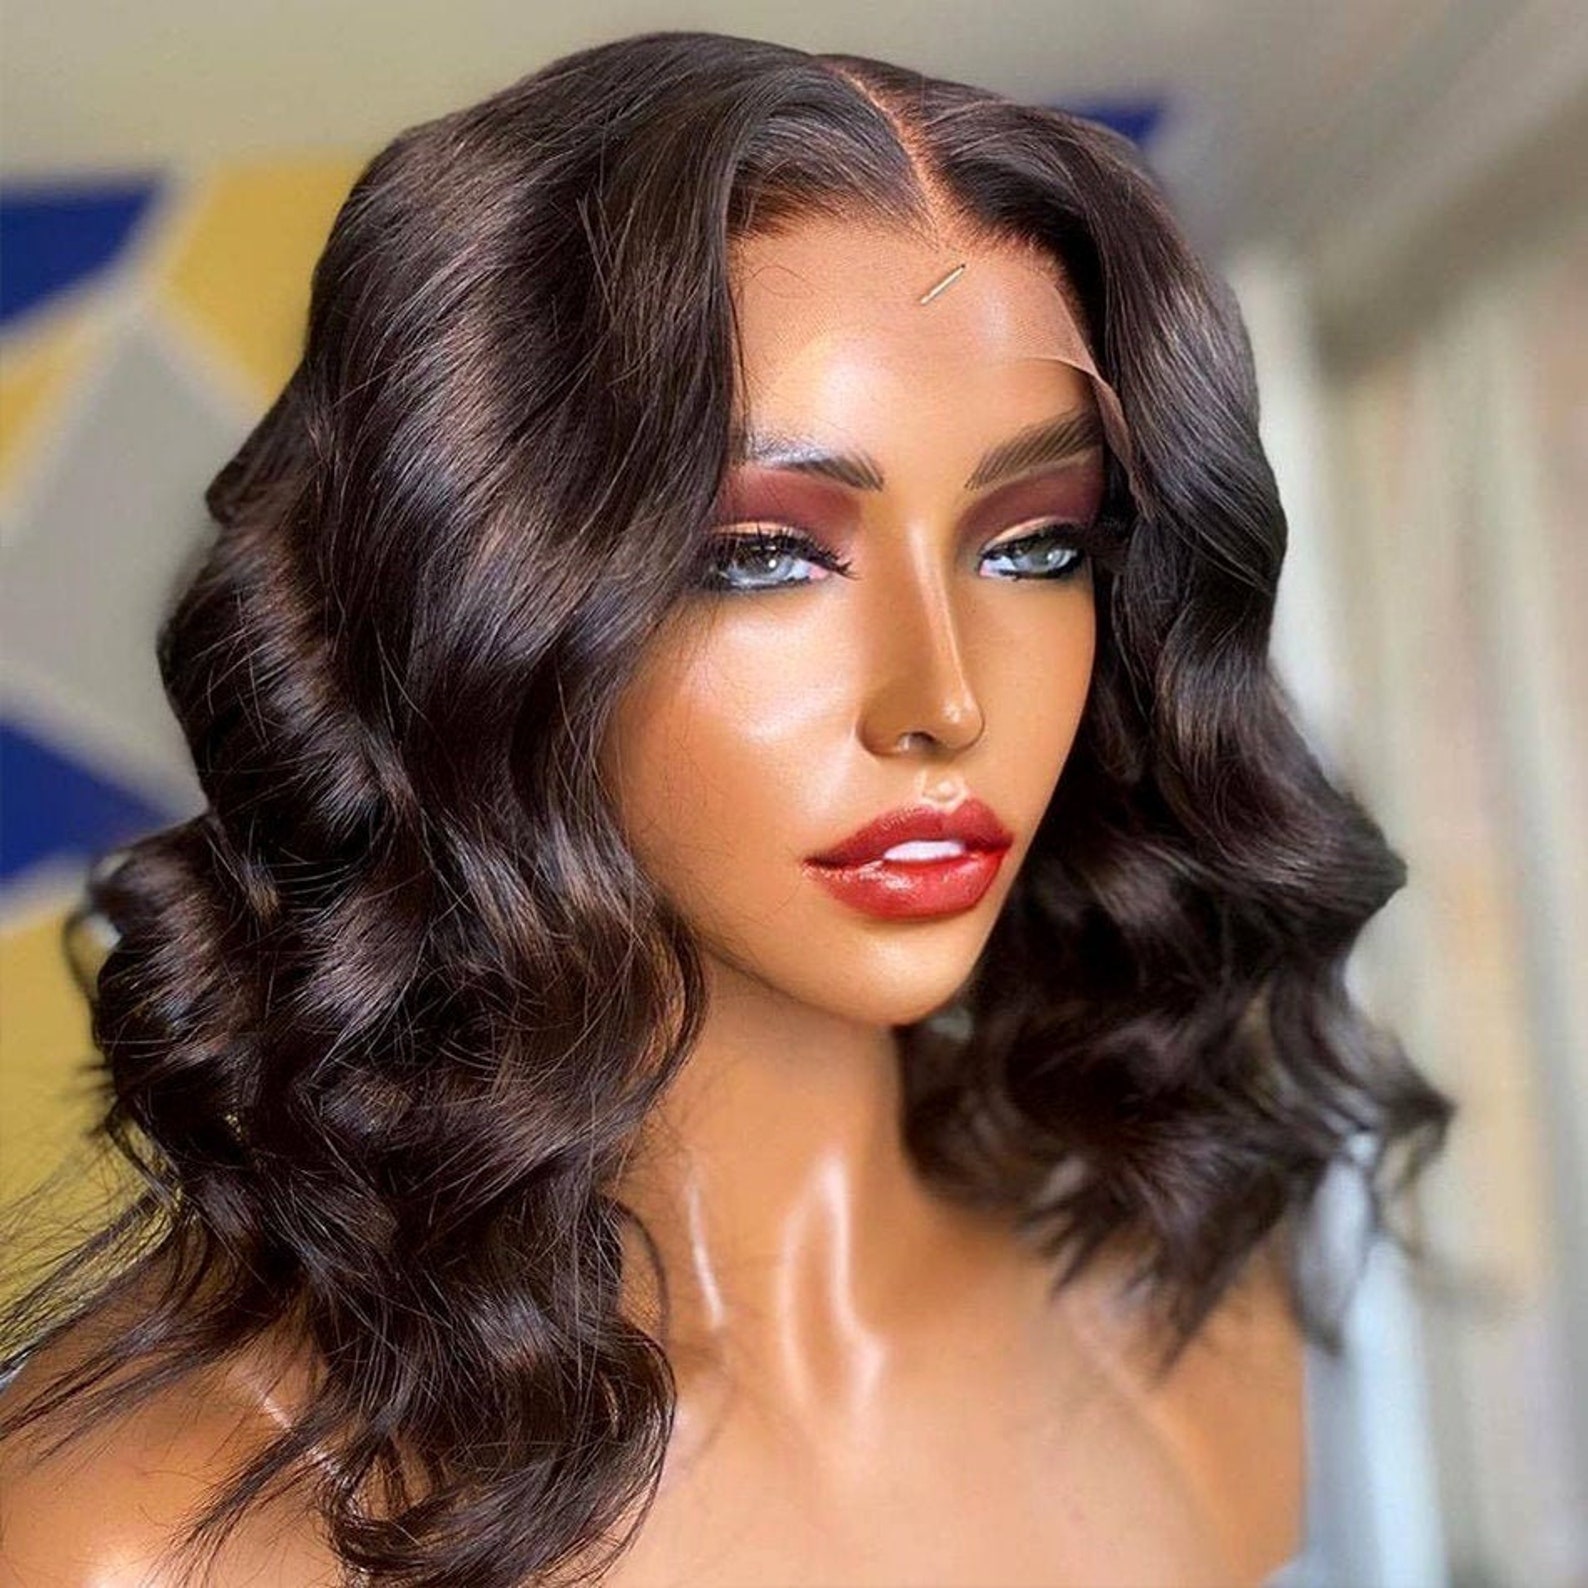 Lace Front Bob Wig Human Hair Remy Body Wave Wig For Women T Etsy